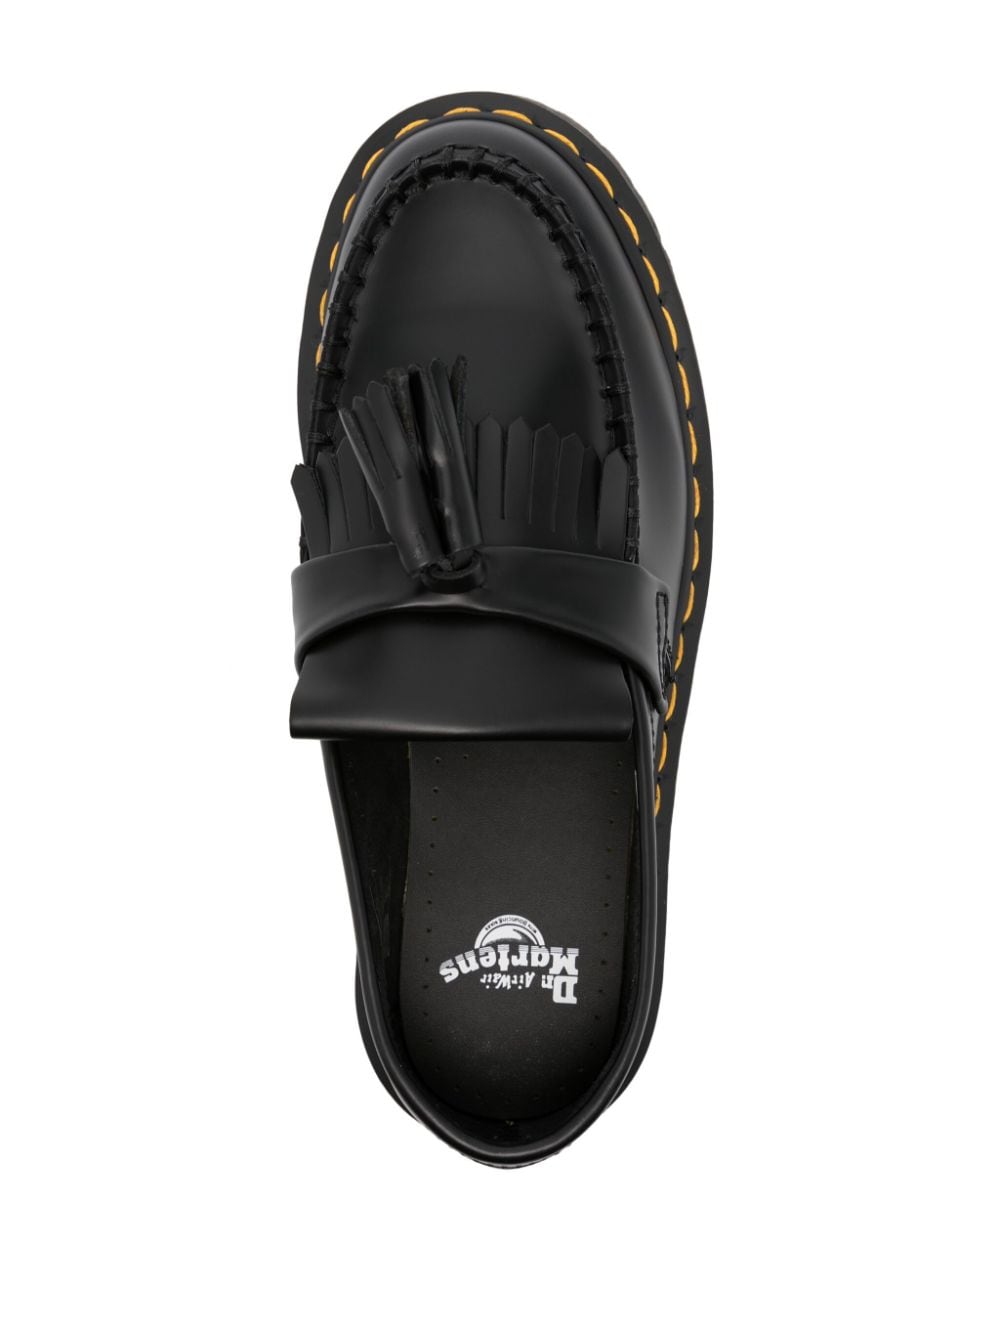 Adrian Bex leather loafers<BR/><BR/><BR/>